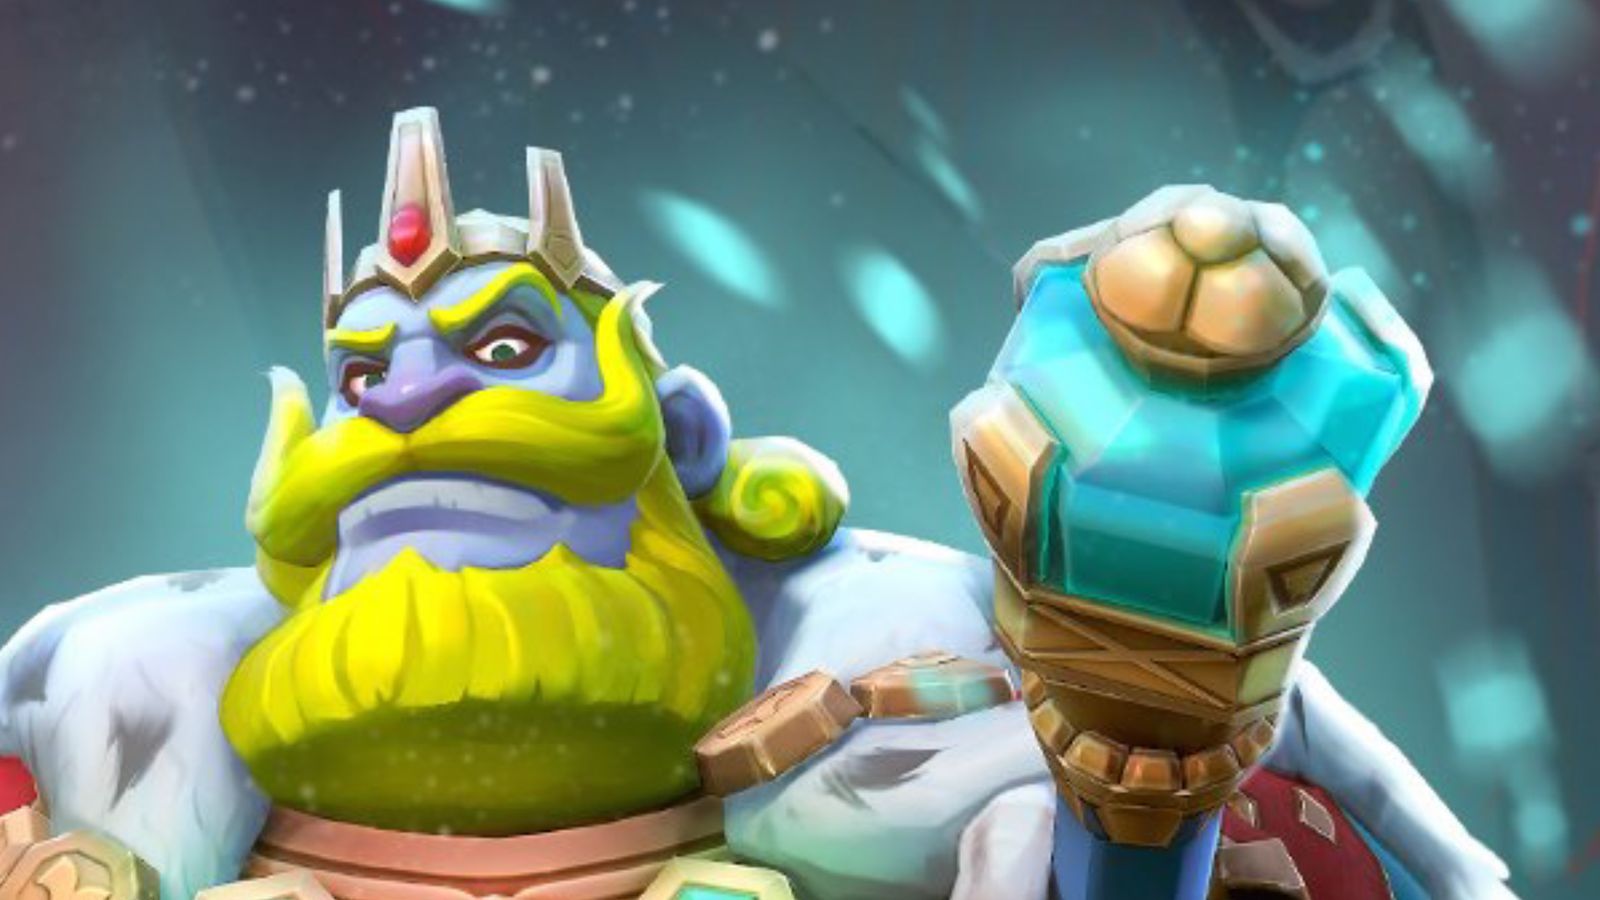 Artwork from Lords Mobile showing the new character Lionel, with gray skin, a green beard, and a regal crown.